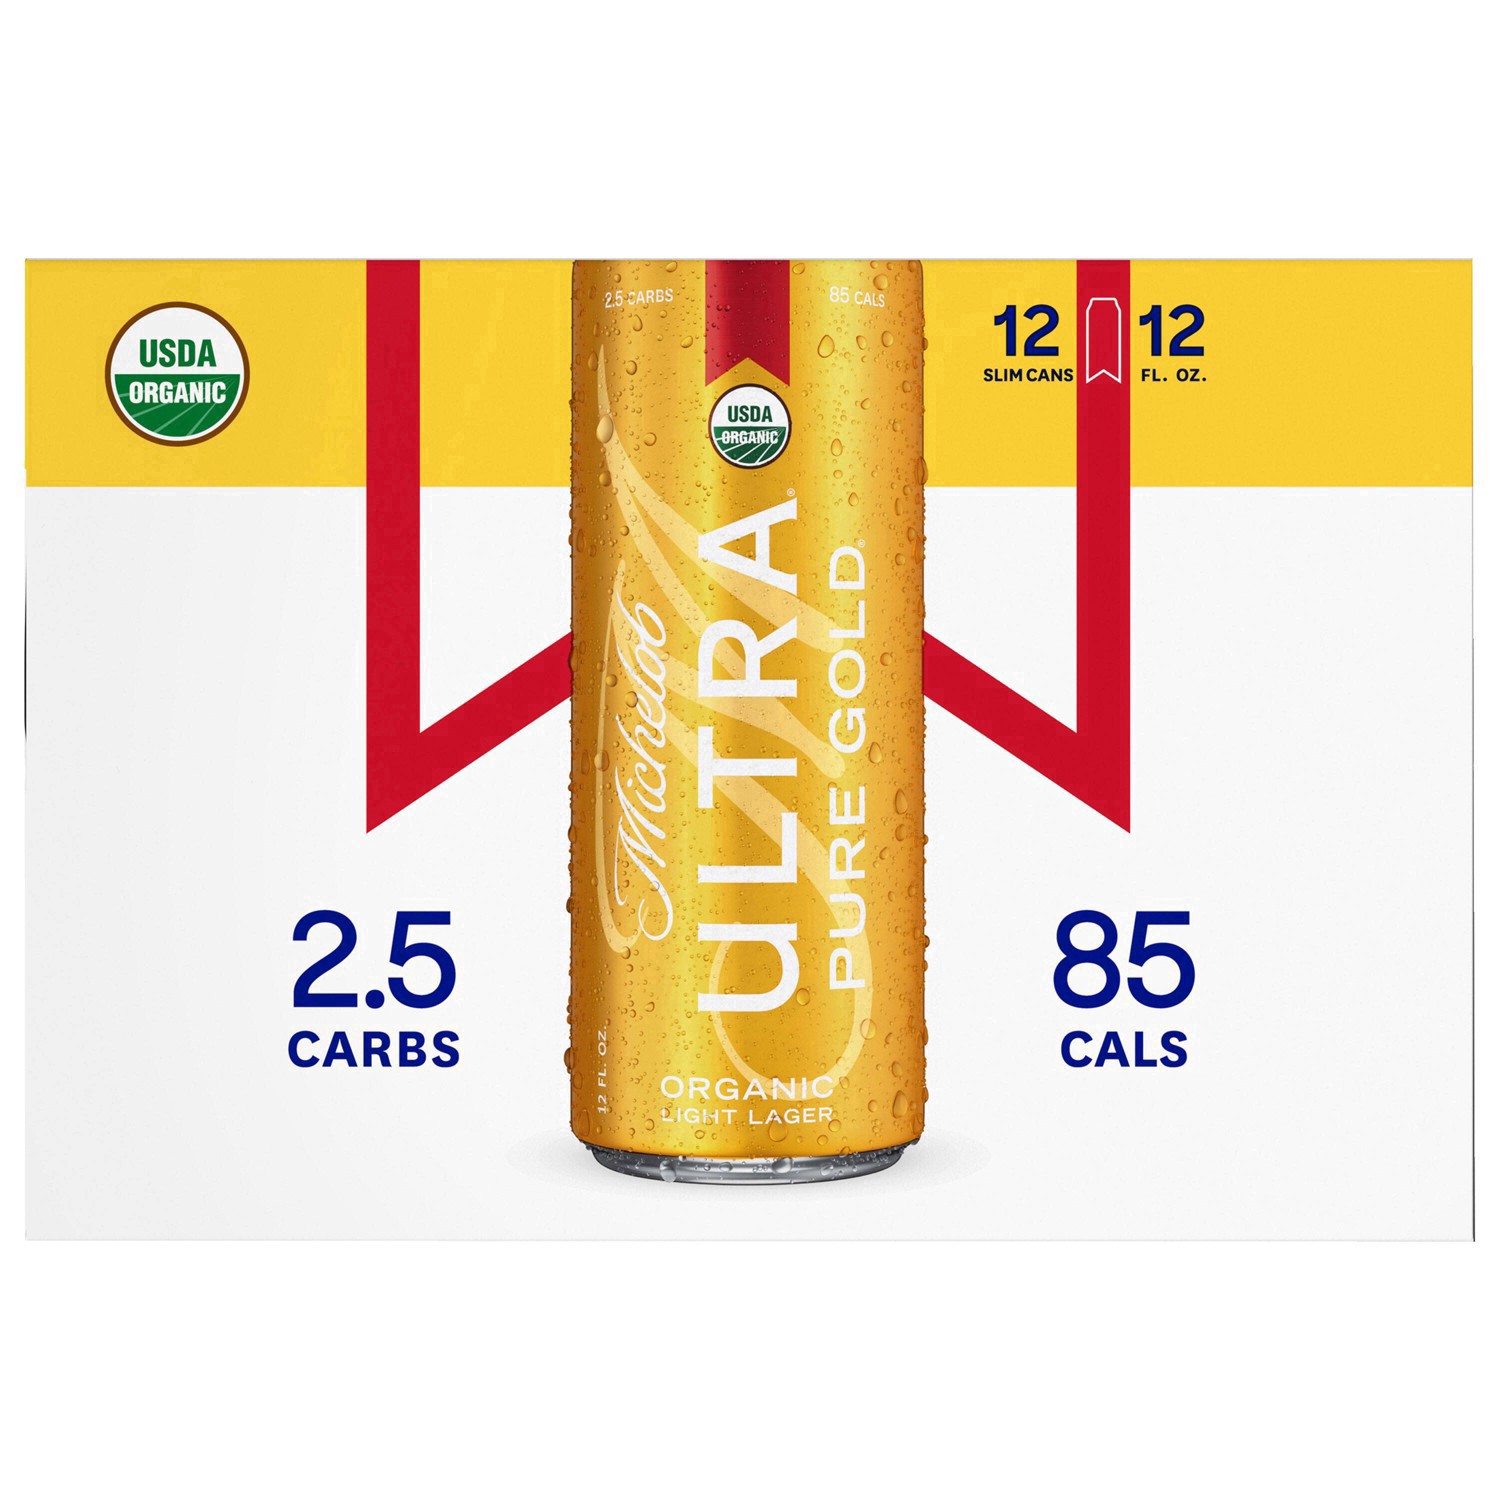 slide 3 of 134, Michelob Ultra Pure Gold Organic Light Lager Beer, 12-12 fl. oz. Cans, 12 ct; 12 oz